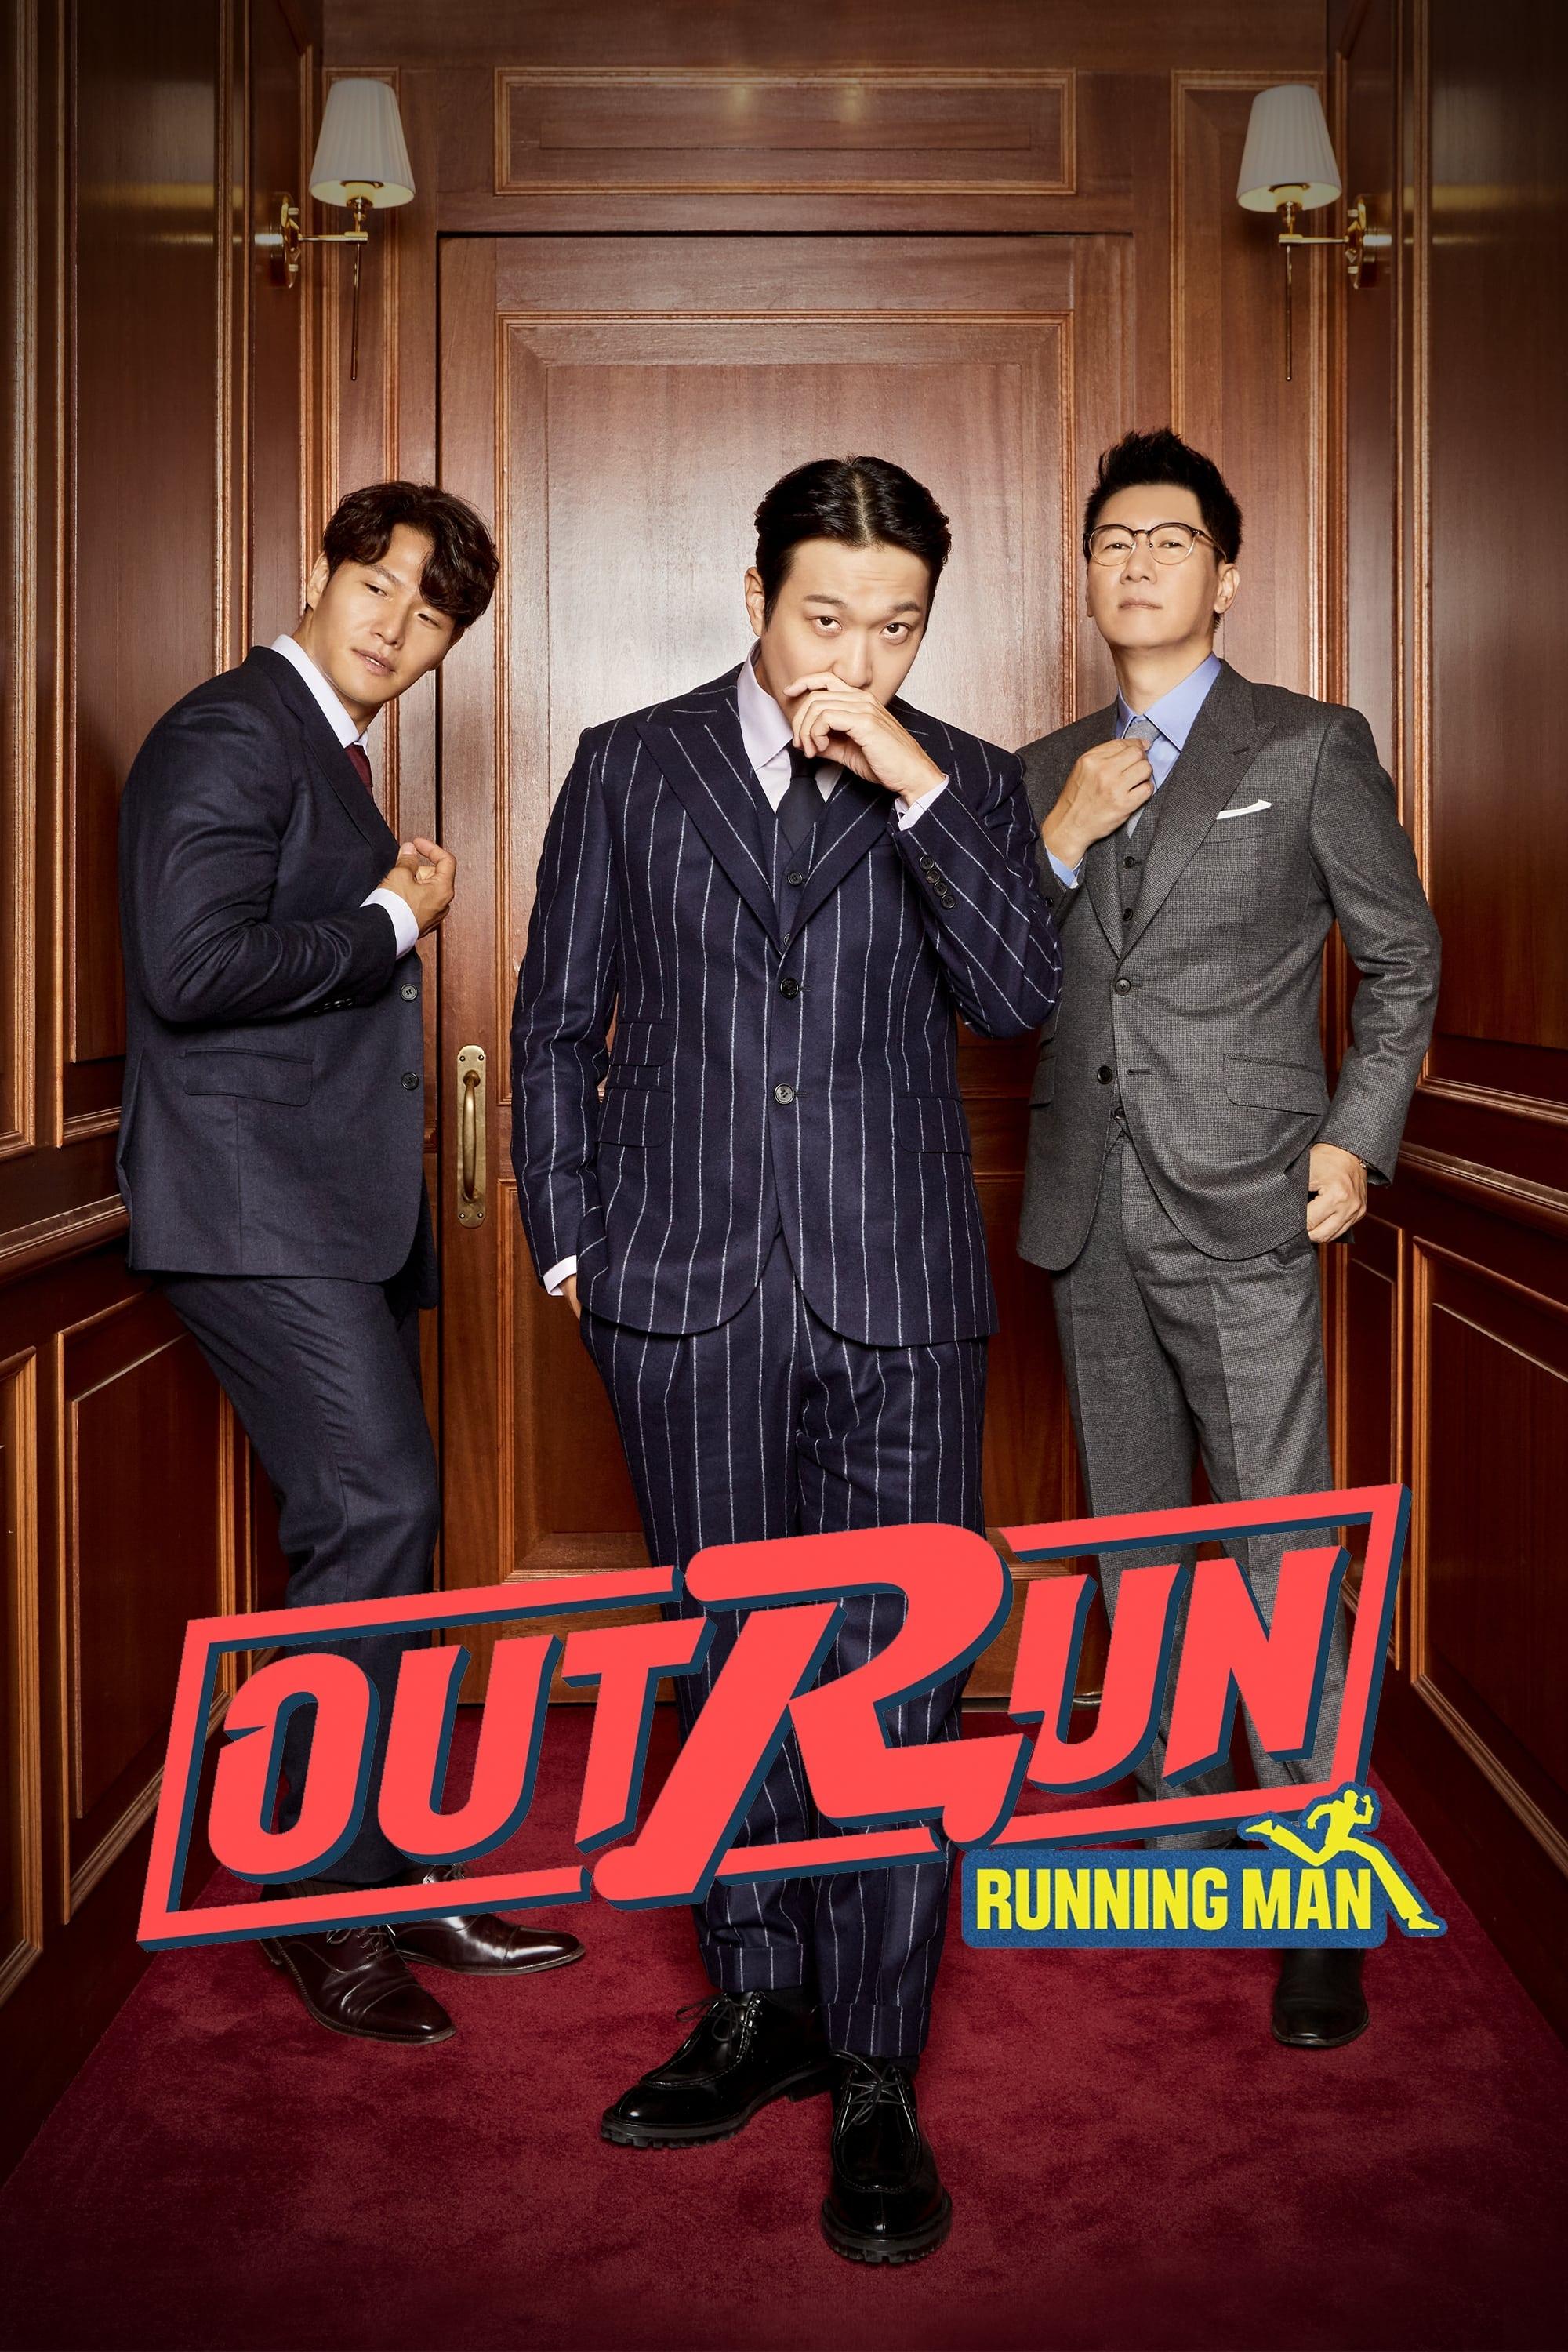 Outrun by Running Man poster